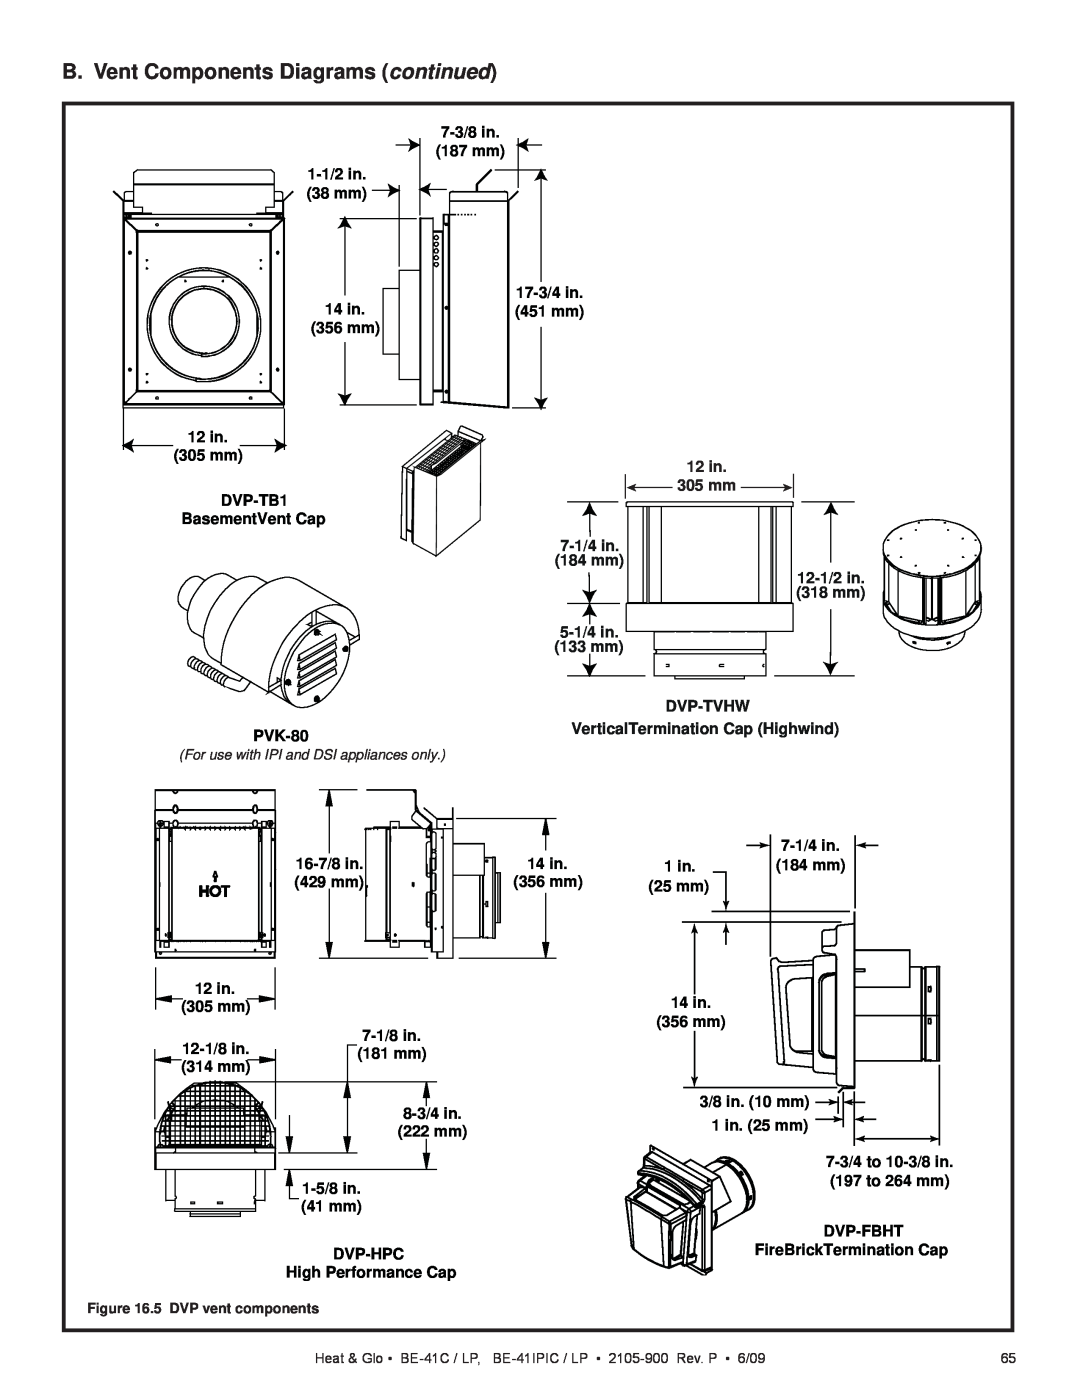 Heat & Glo LifeStyle BE-41IPIC B. Vent Components Diagrams continued, 12 in, 7-1/4in, 12-1/2in, 318 mm, 5-1/4in, Dvp-Tvhw 